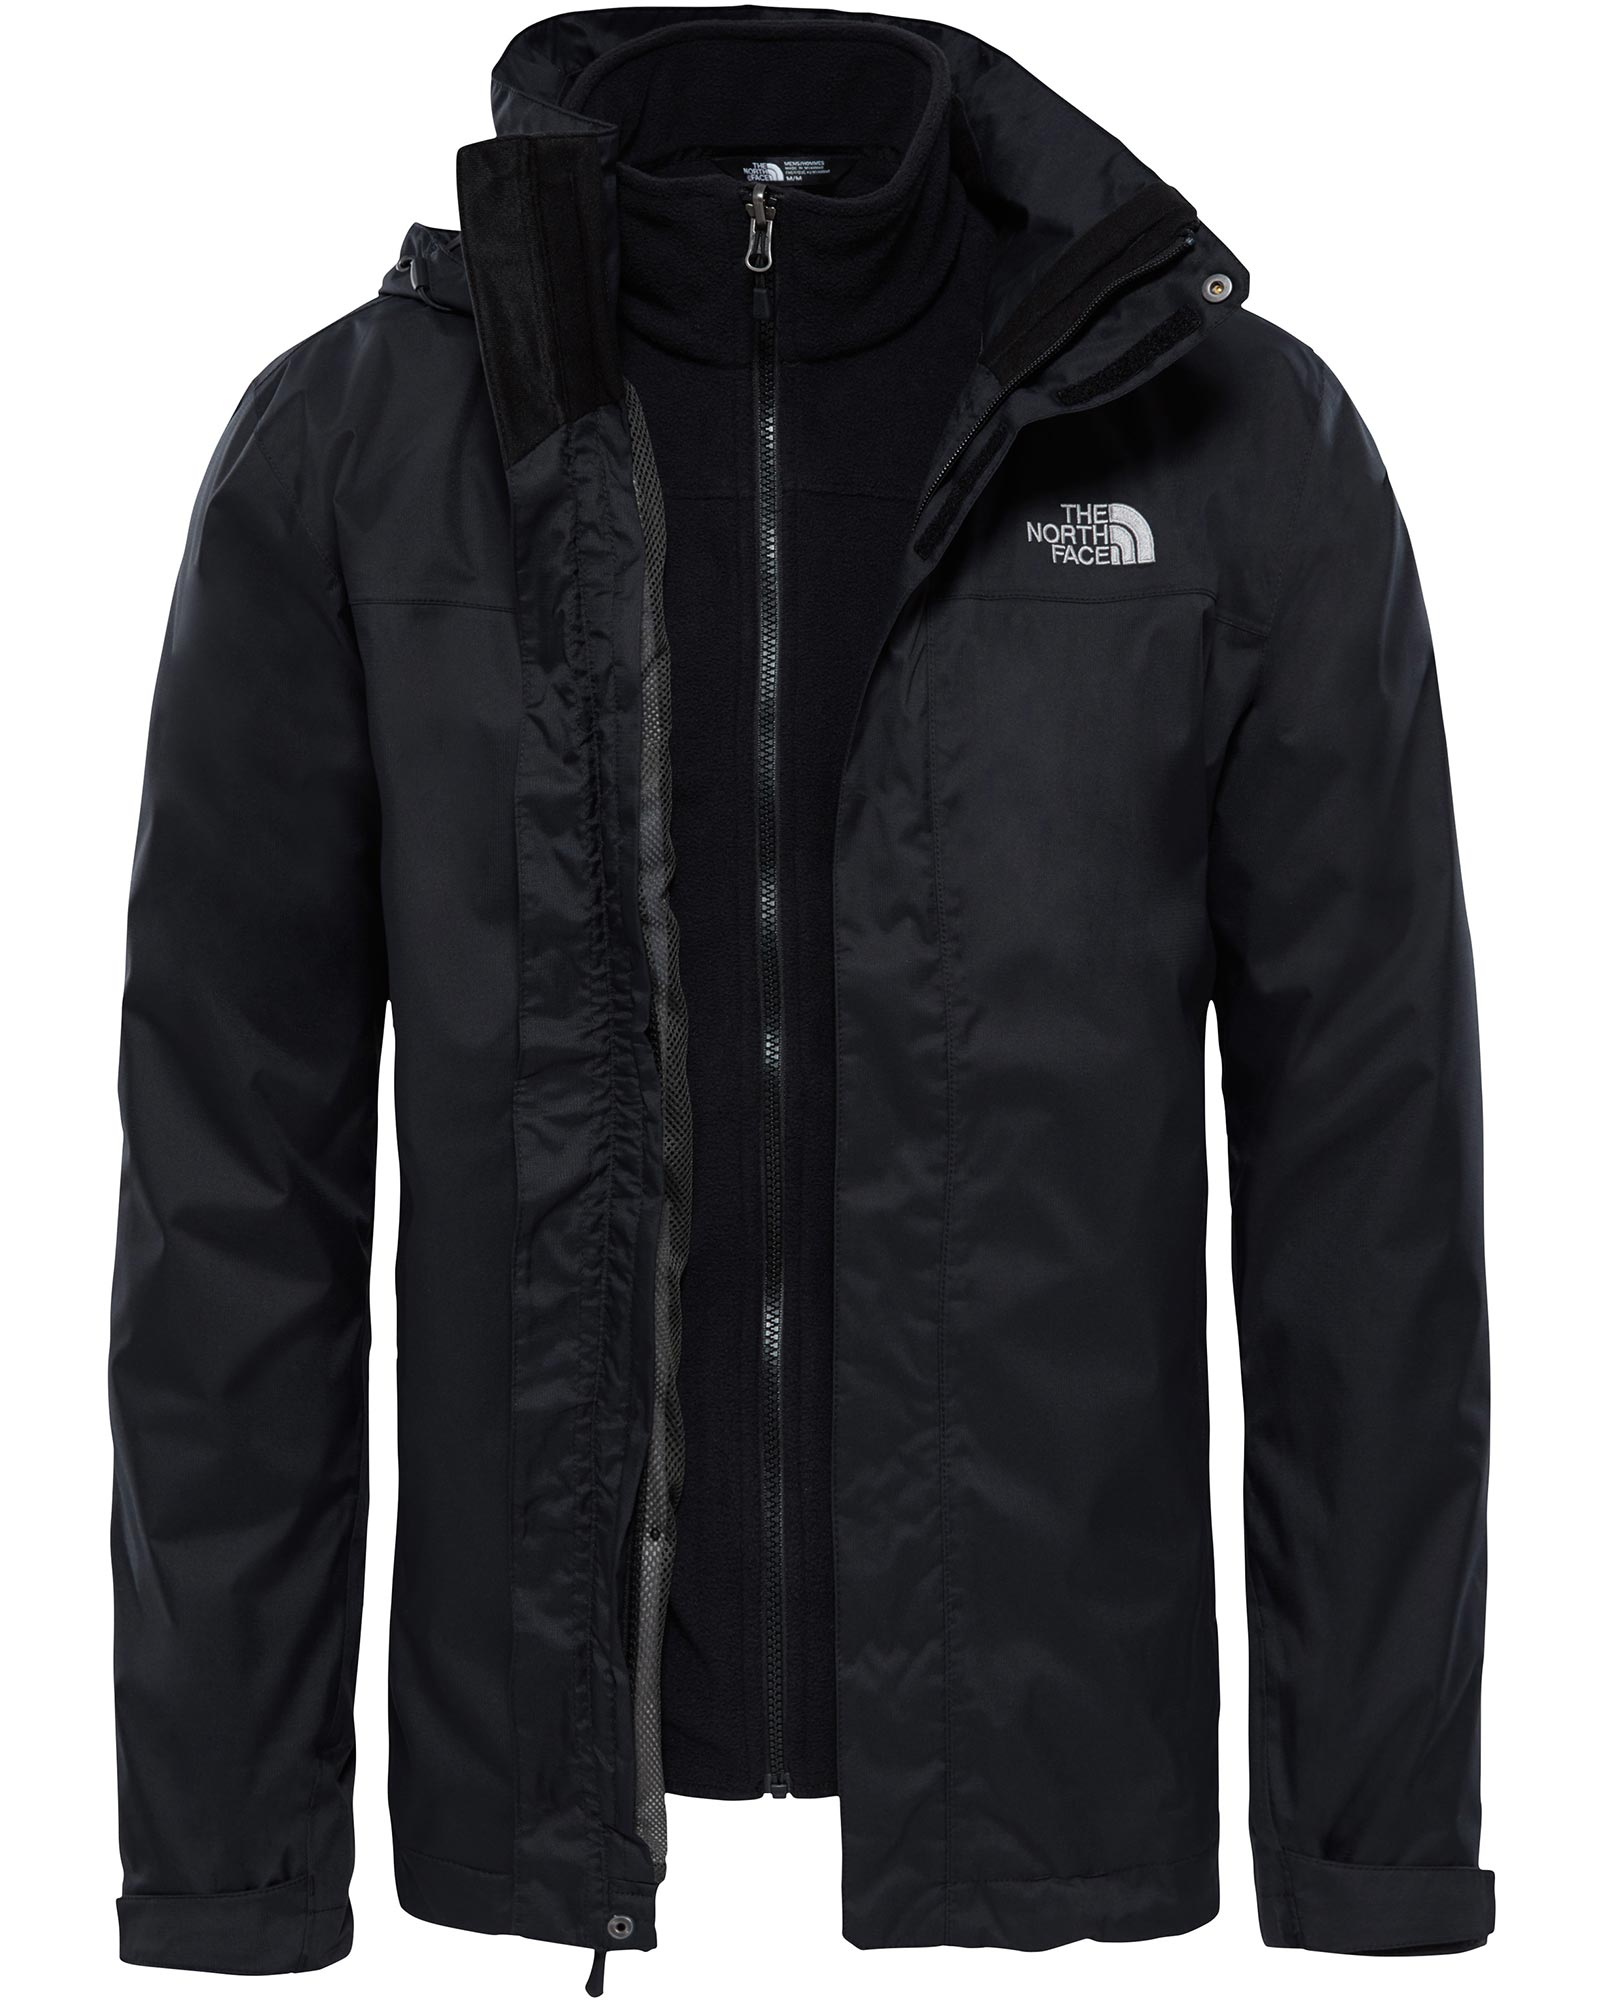 The North Face Evolve Triclimate Men’s Jacket - TNF Black XS